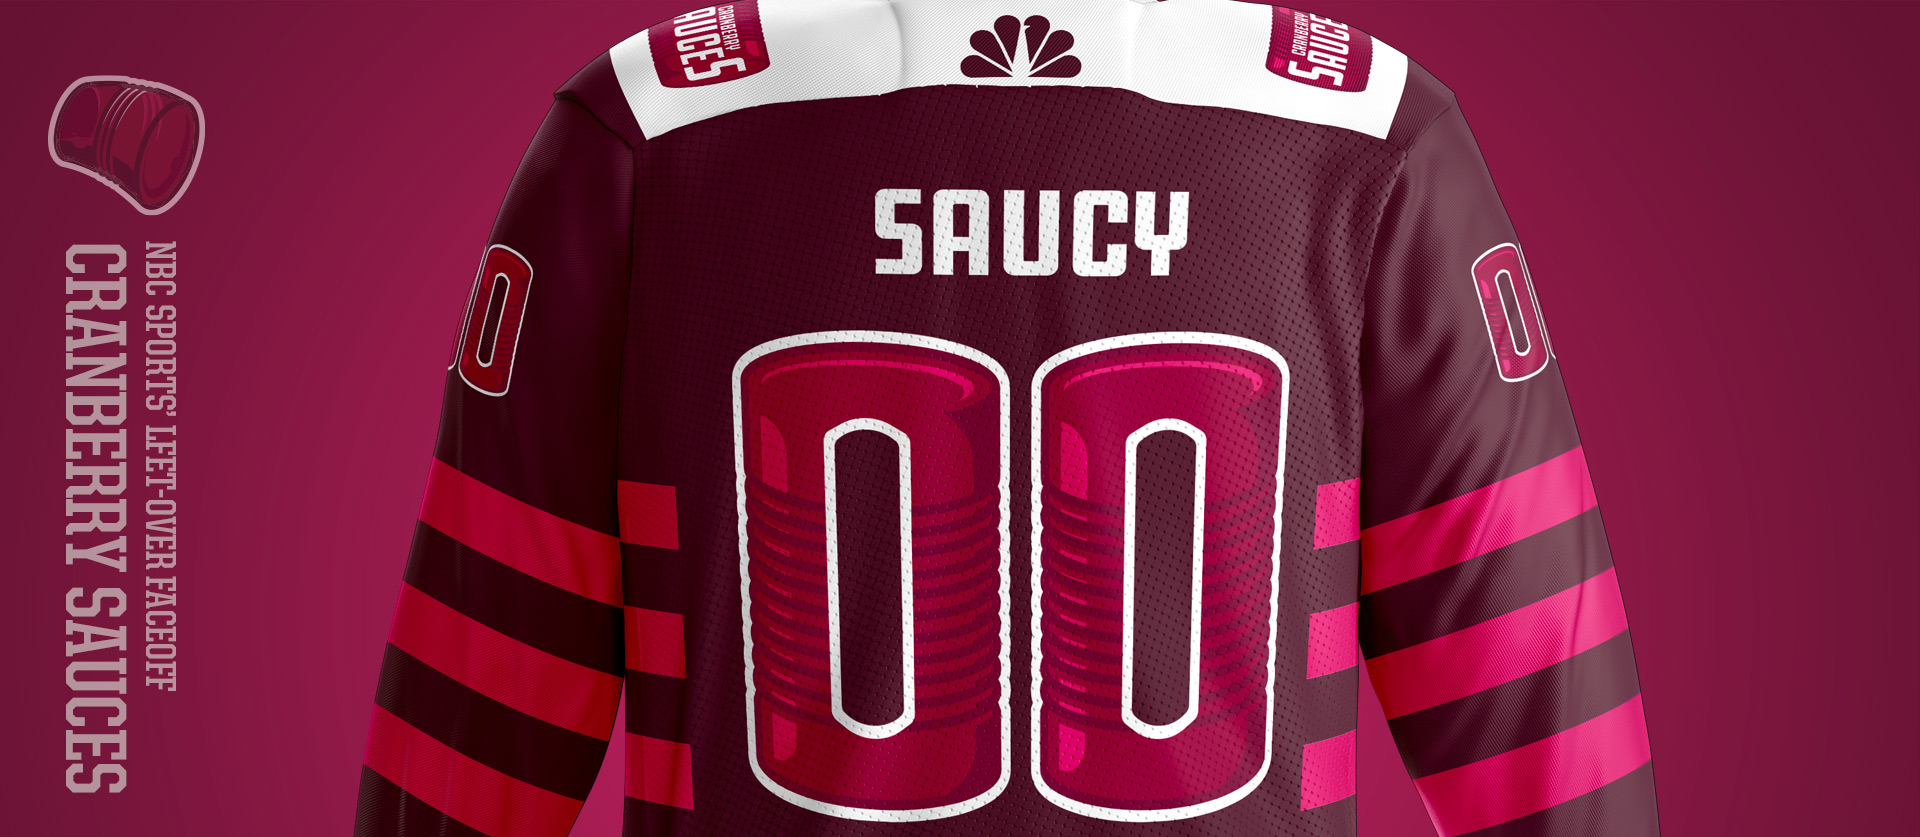 Cranberry Sauces Front - Football Uniform Design for NBC Sports Thanksgiving Second Feast Face-off